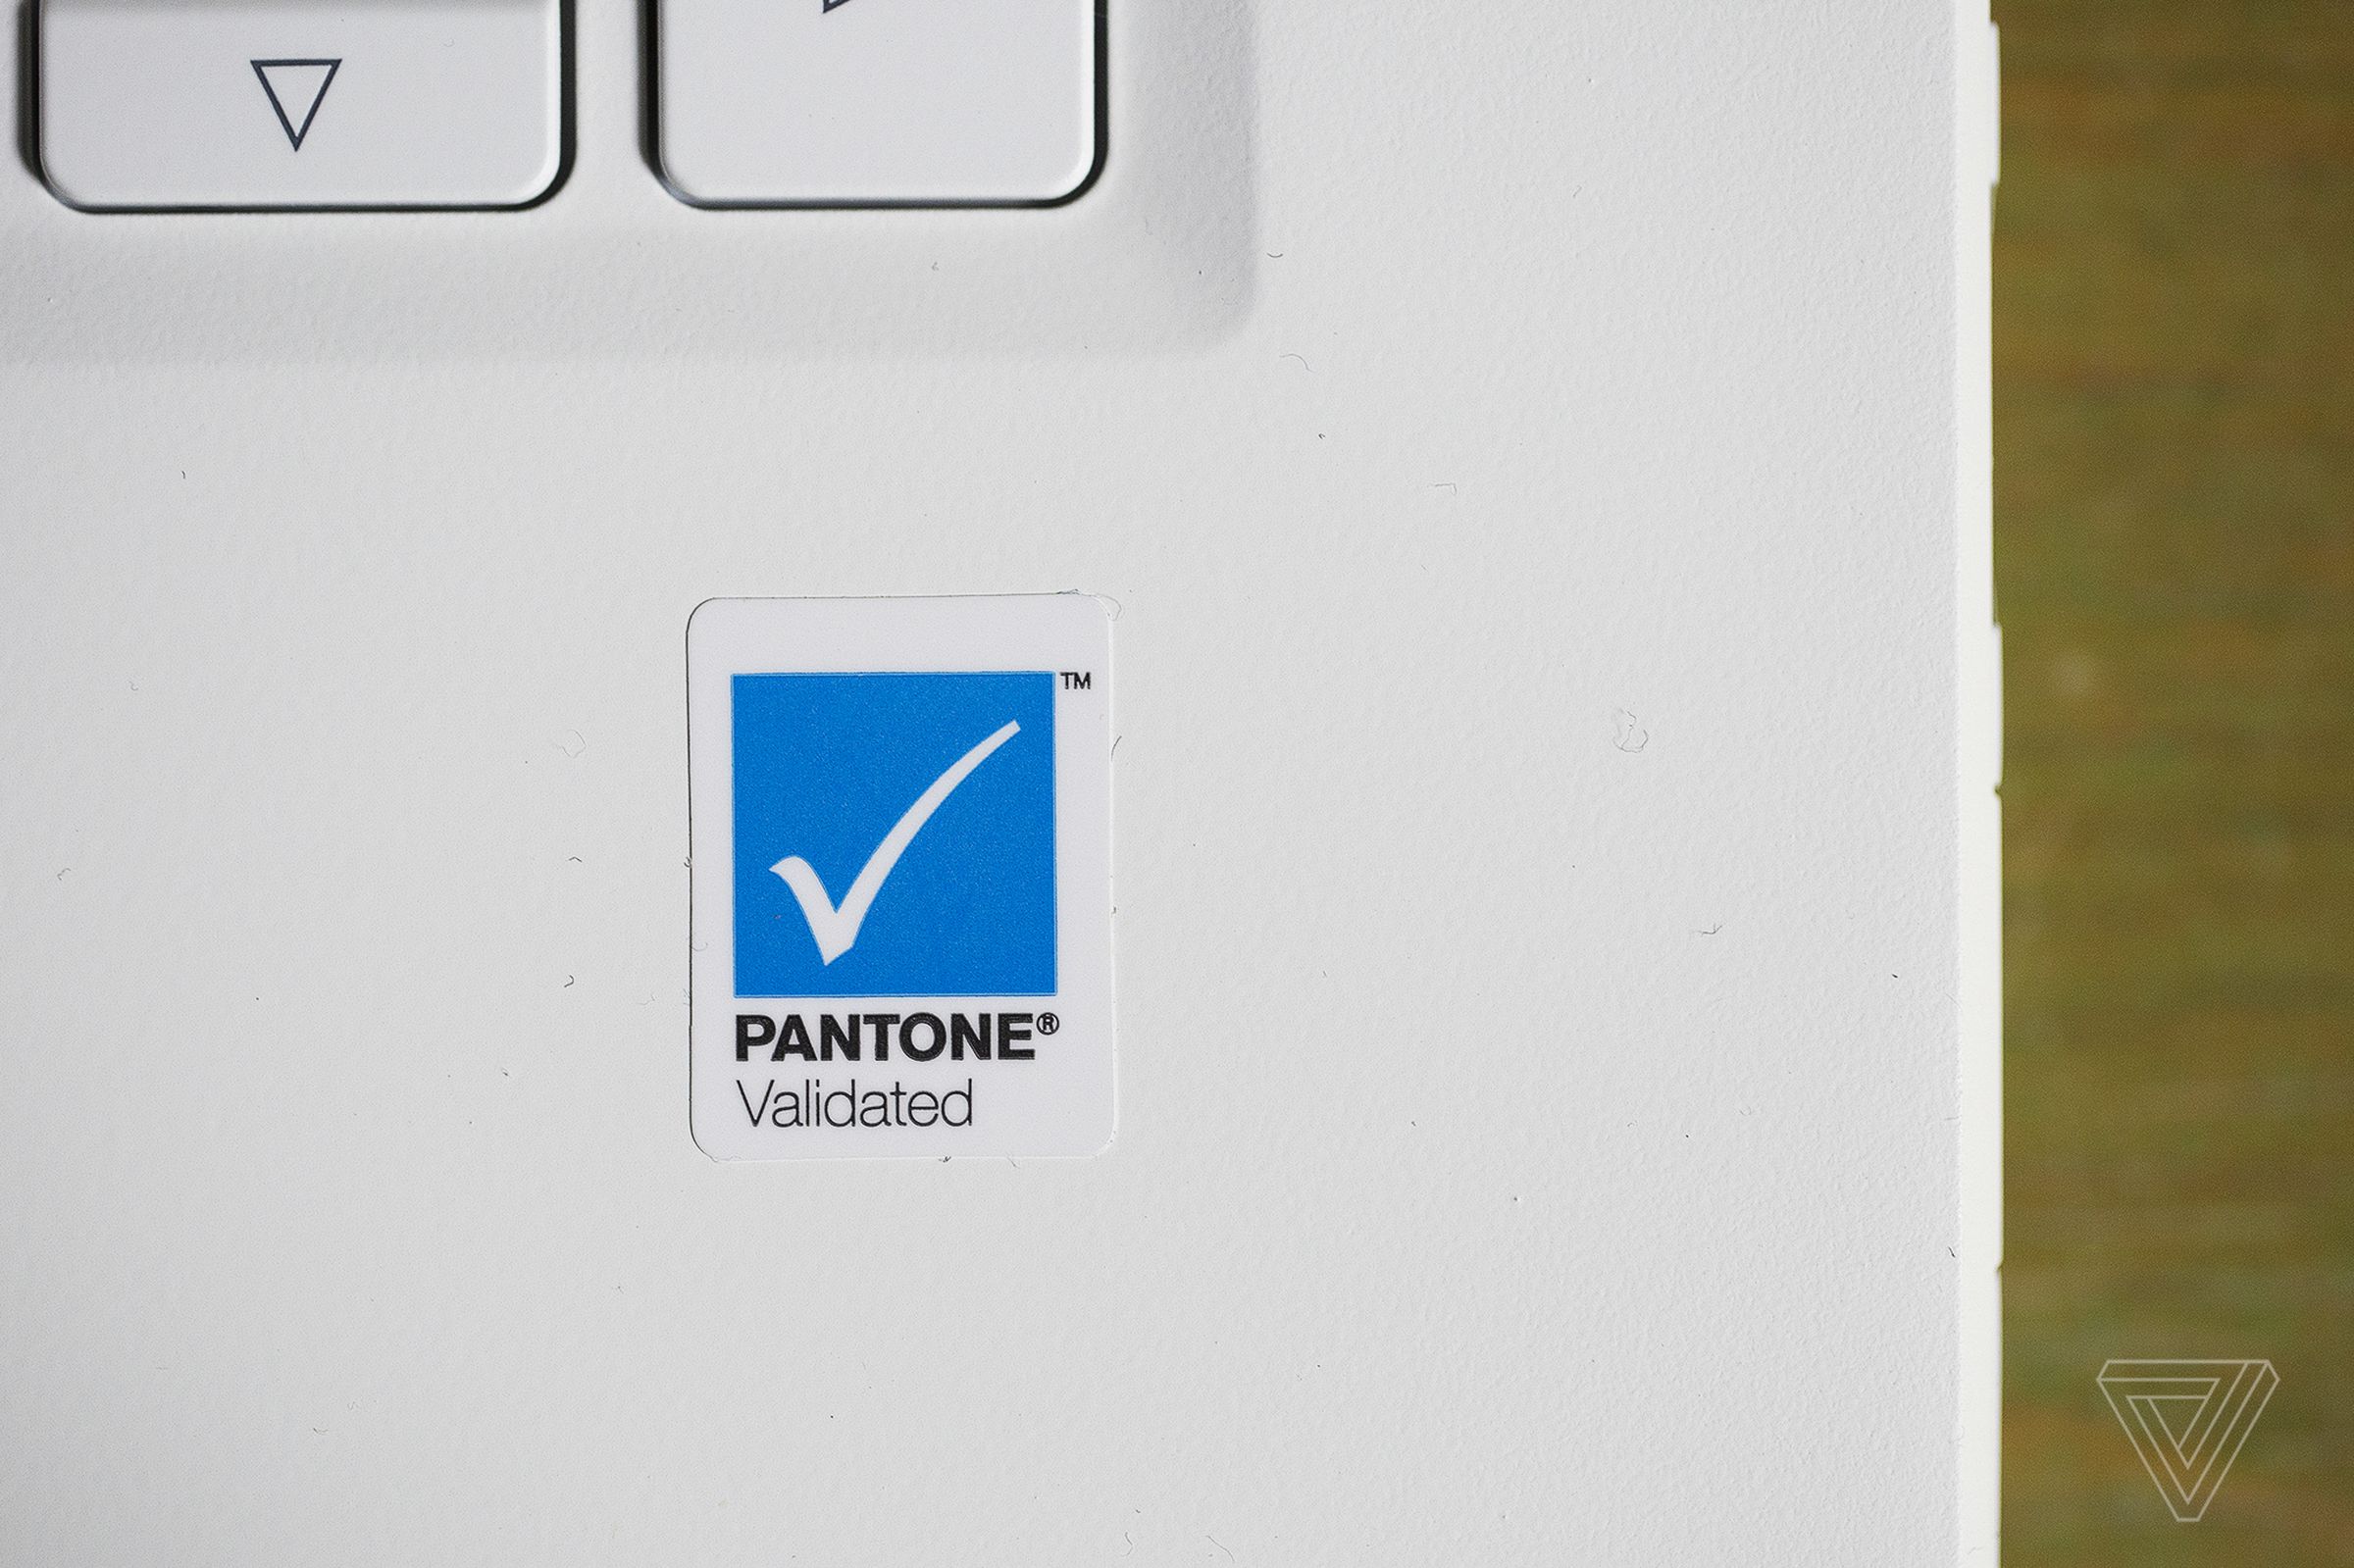 A sticker with a white checkmark on a blue background labeled “Pantone Validated” on the bottom right palm rest of the Acer ConceptD 7 Ezel.